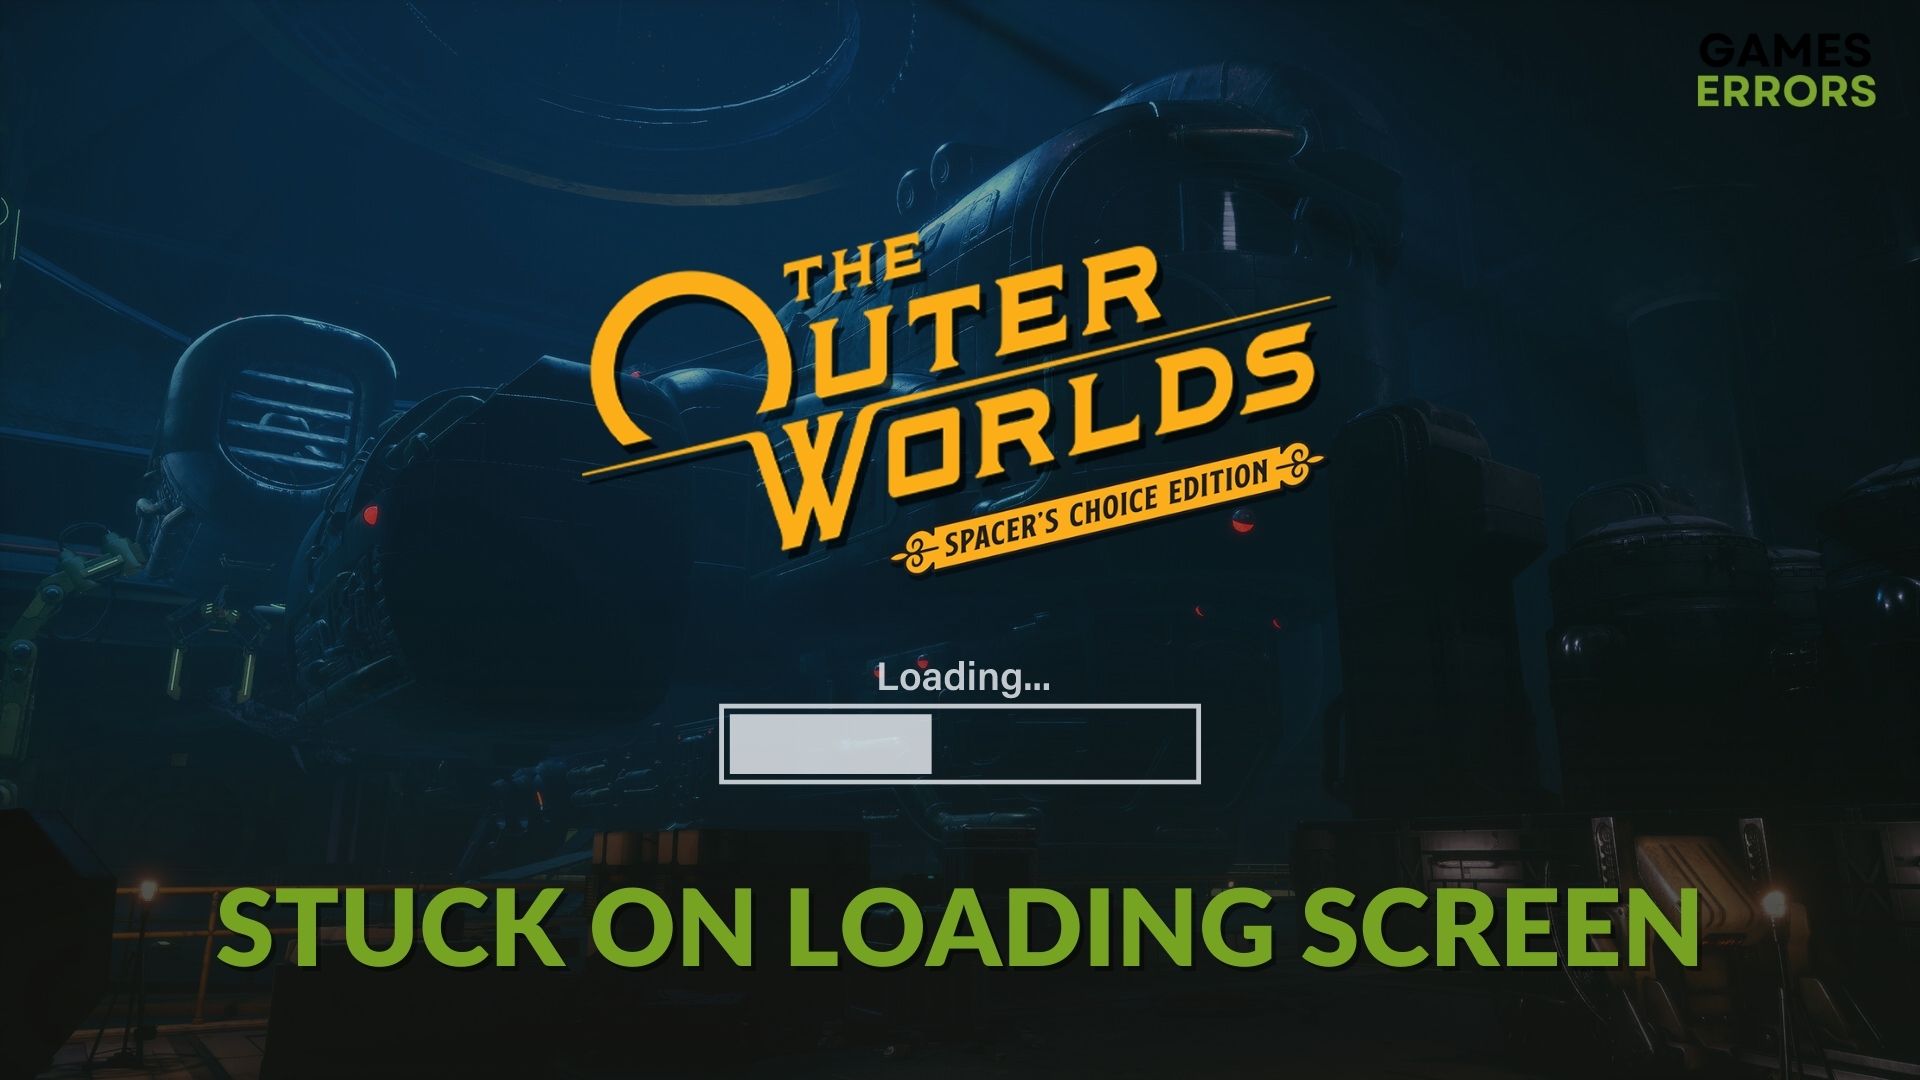 instal the last version for windows The Outer Worlds: Spacer